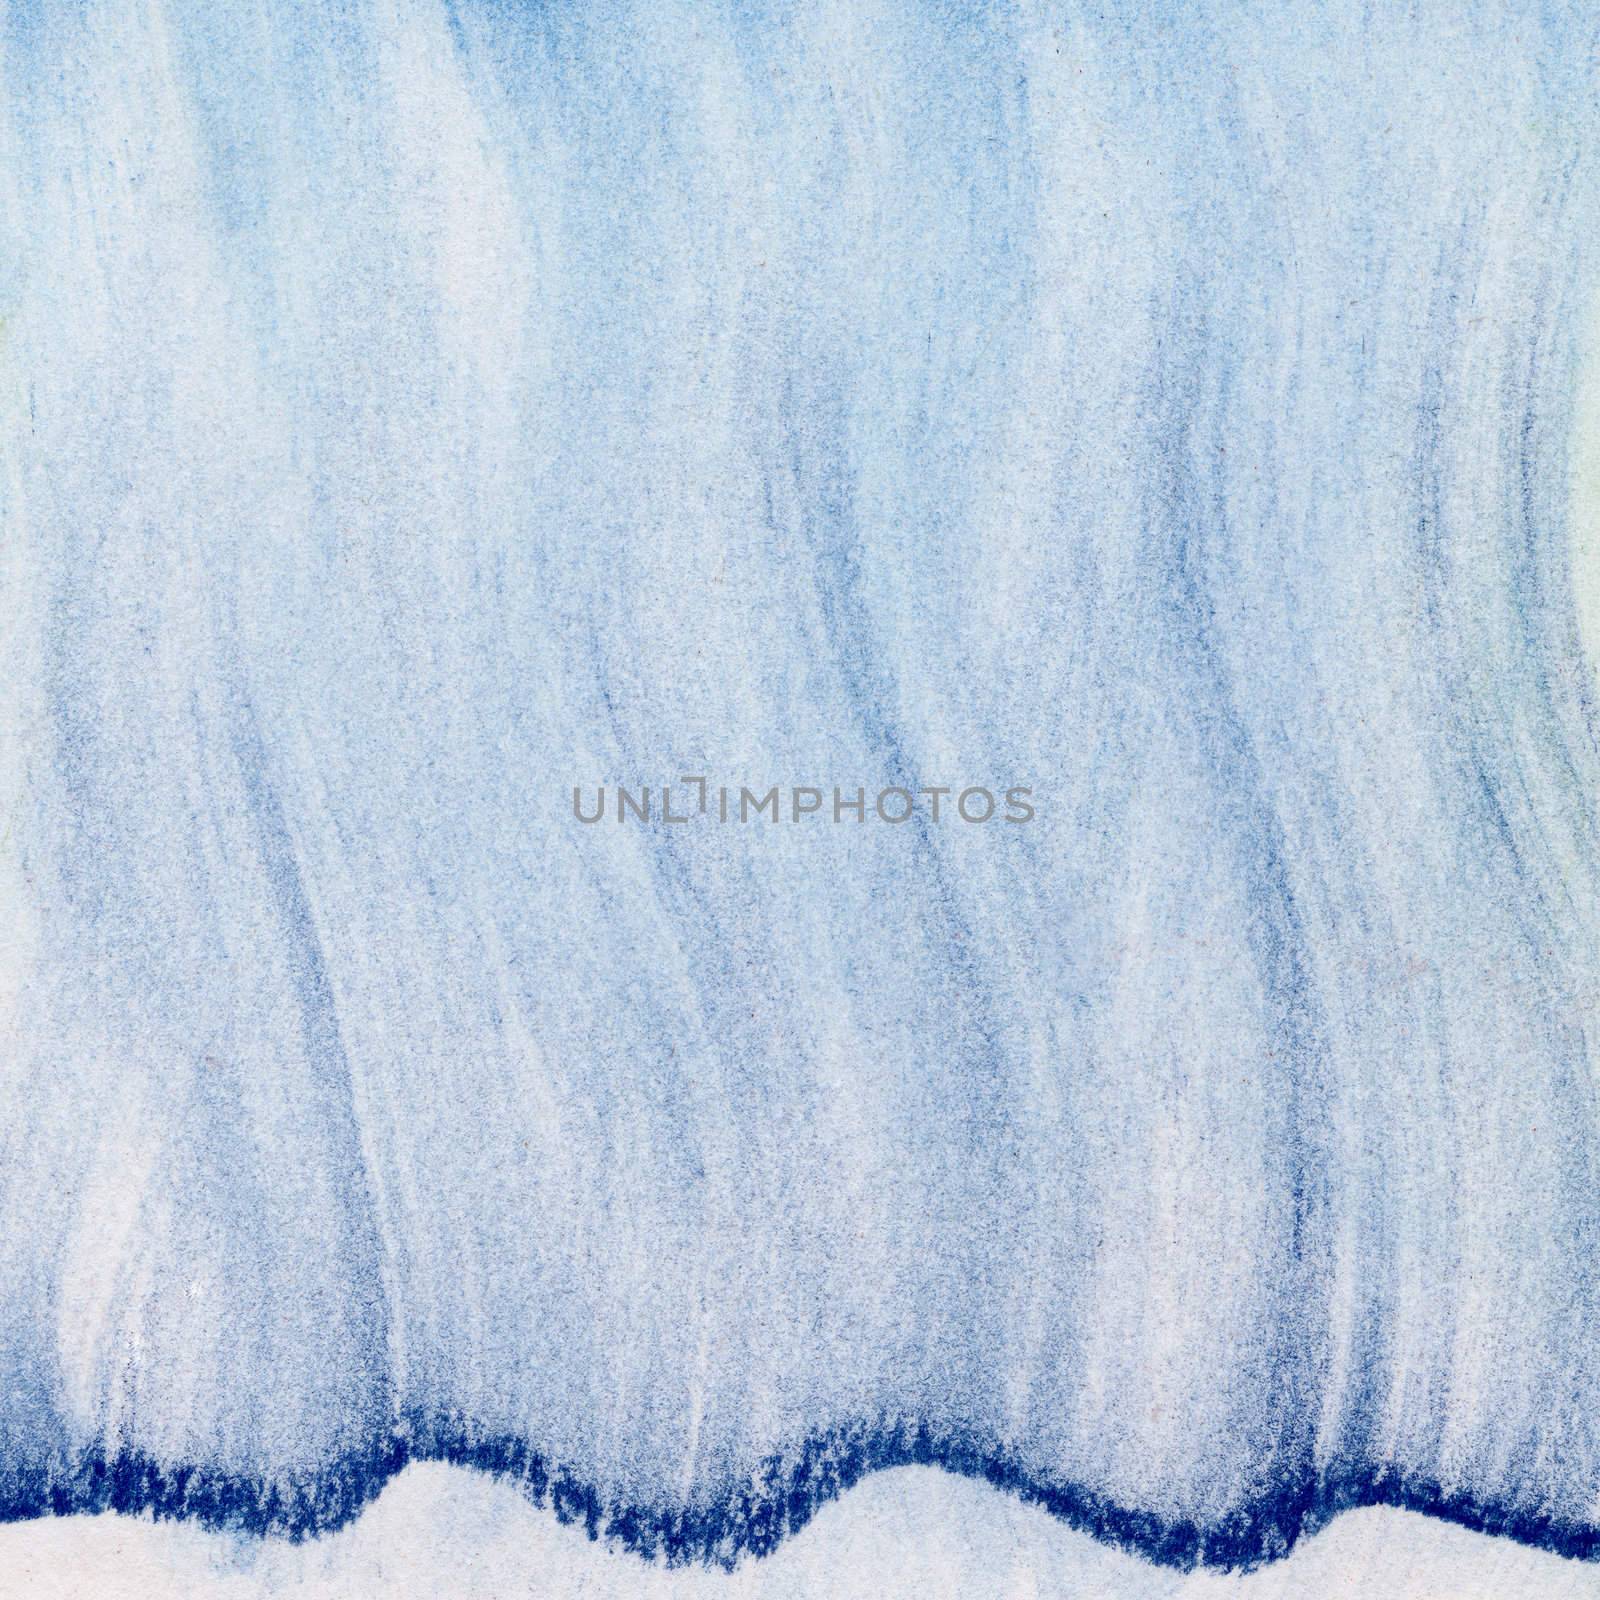 blue wavy abstract background - vertical smudges of soft pastel crayons on white paper